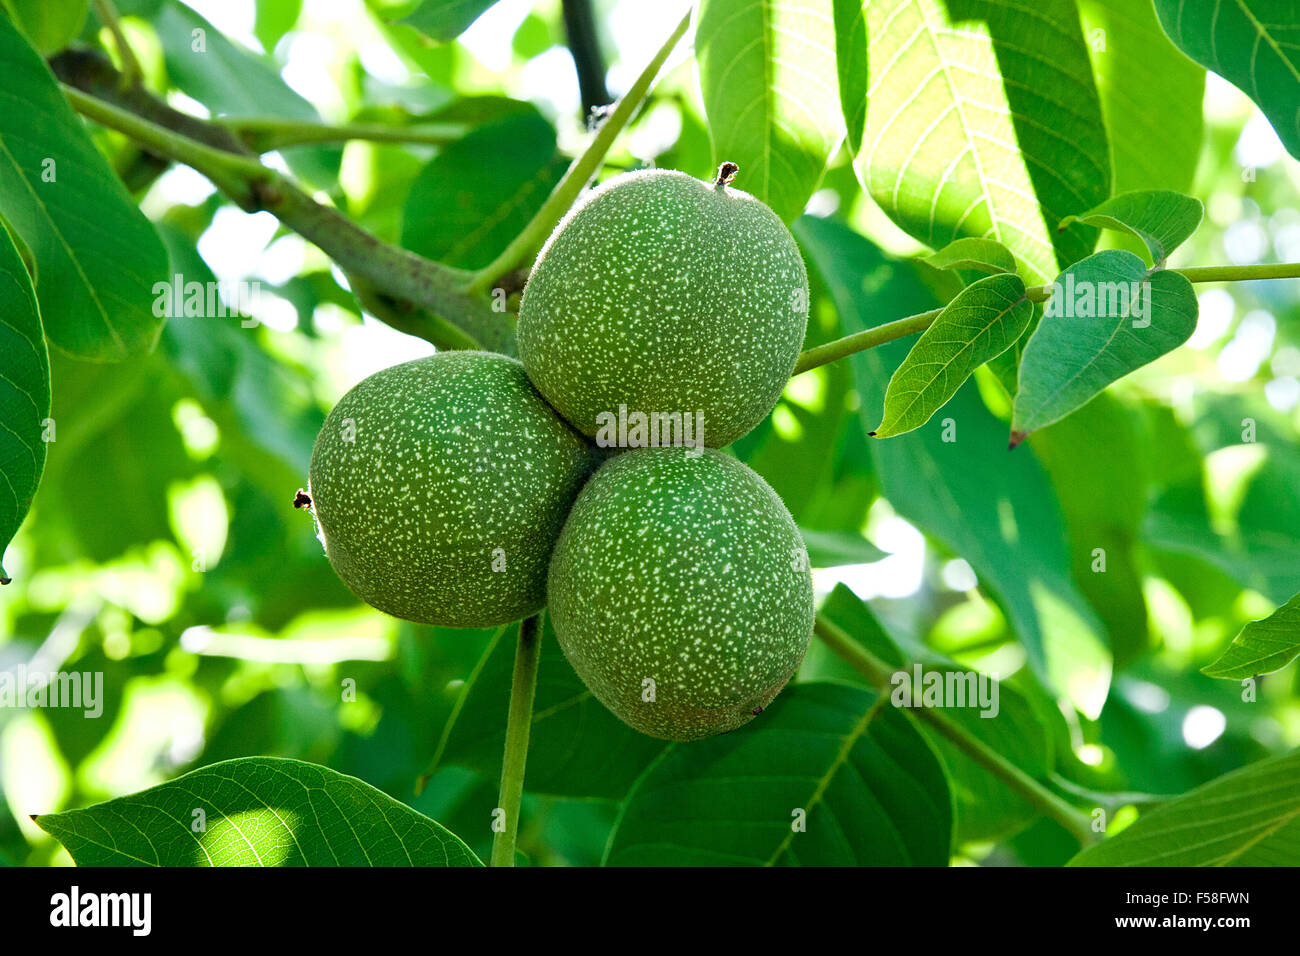 Green walnuts with green leaves on a tree branch. Stock Photo